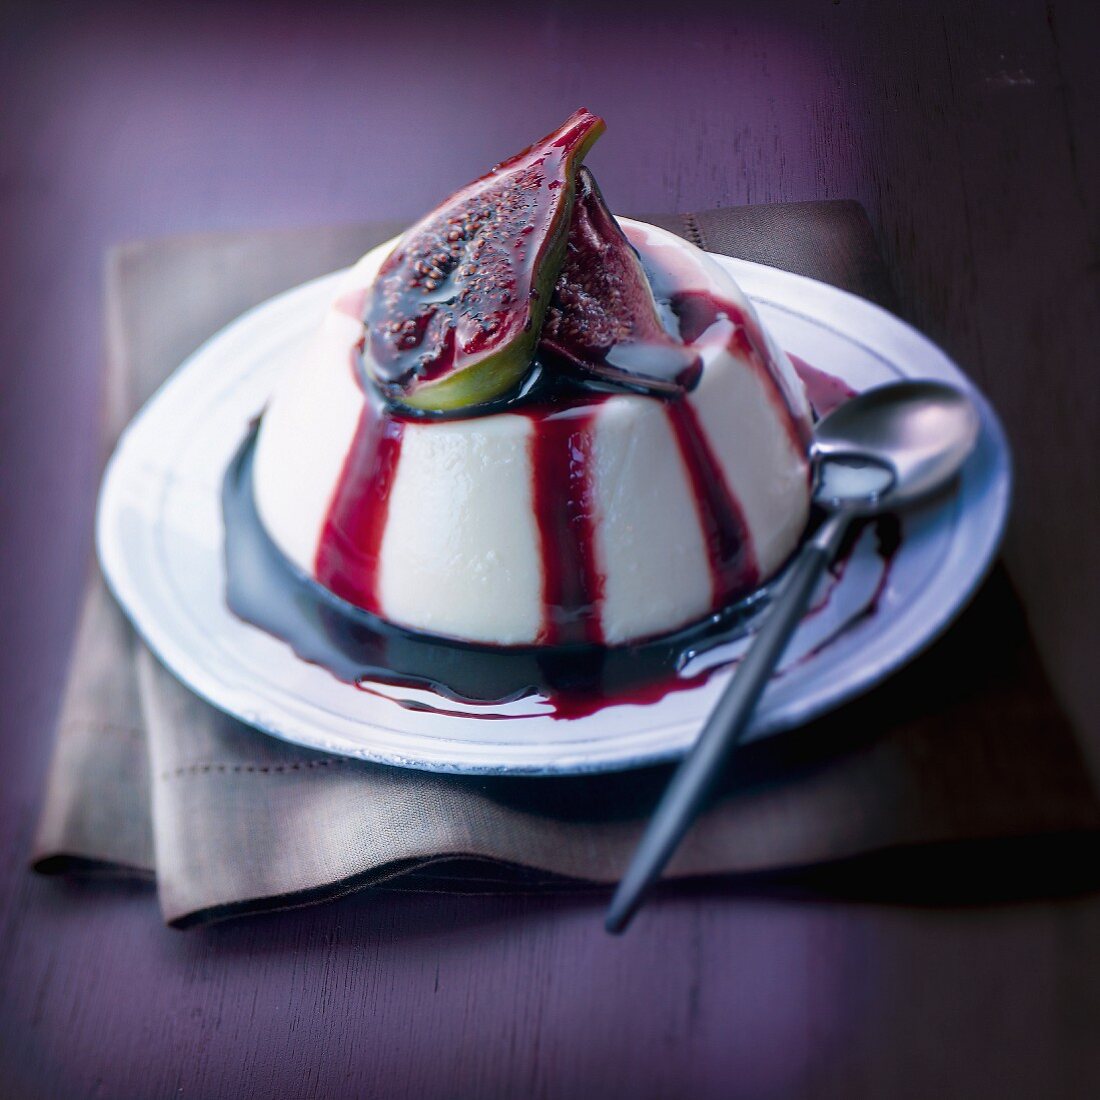 Blancmange with figs stewed in red wine